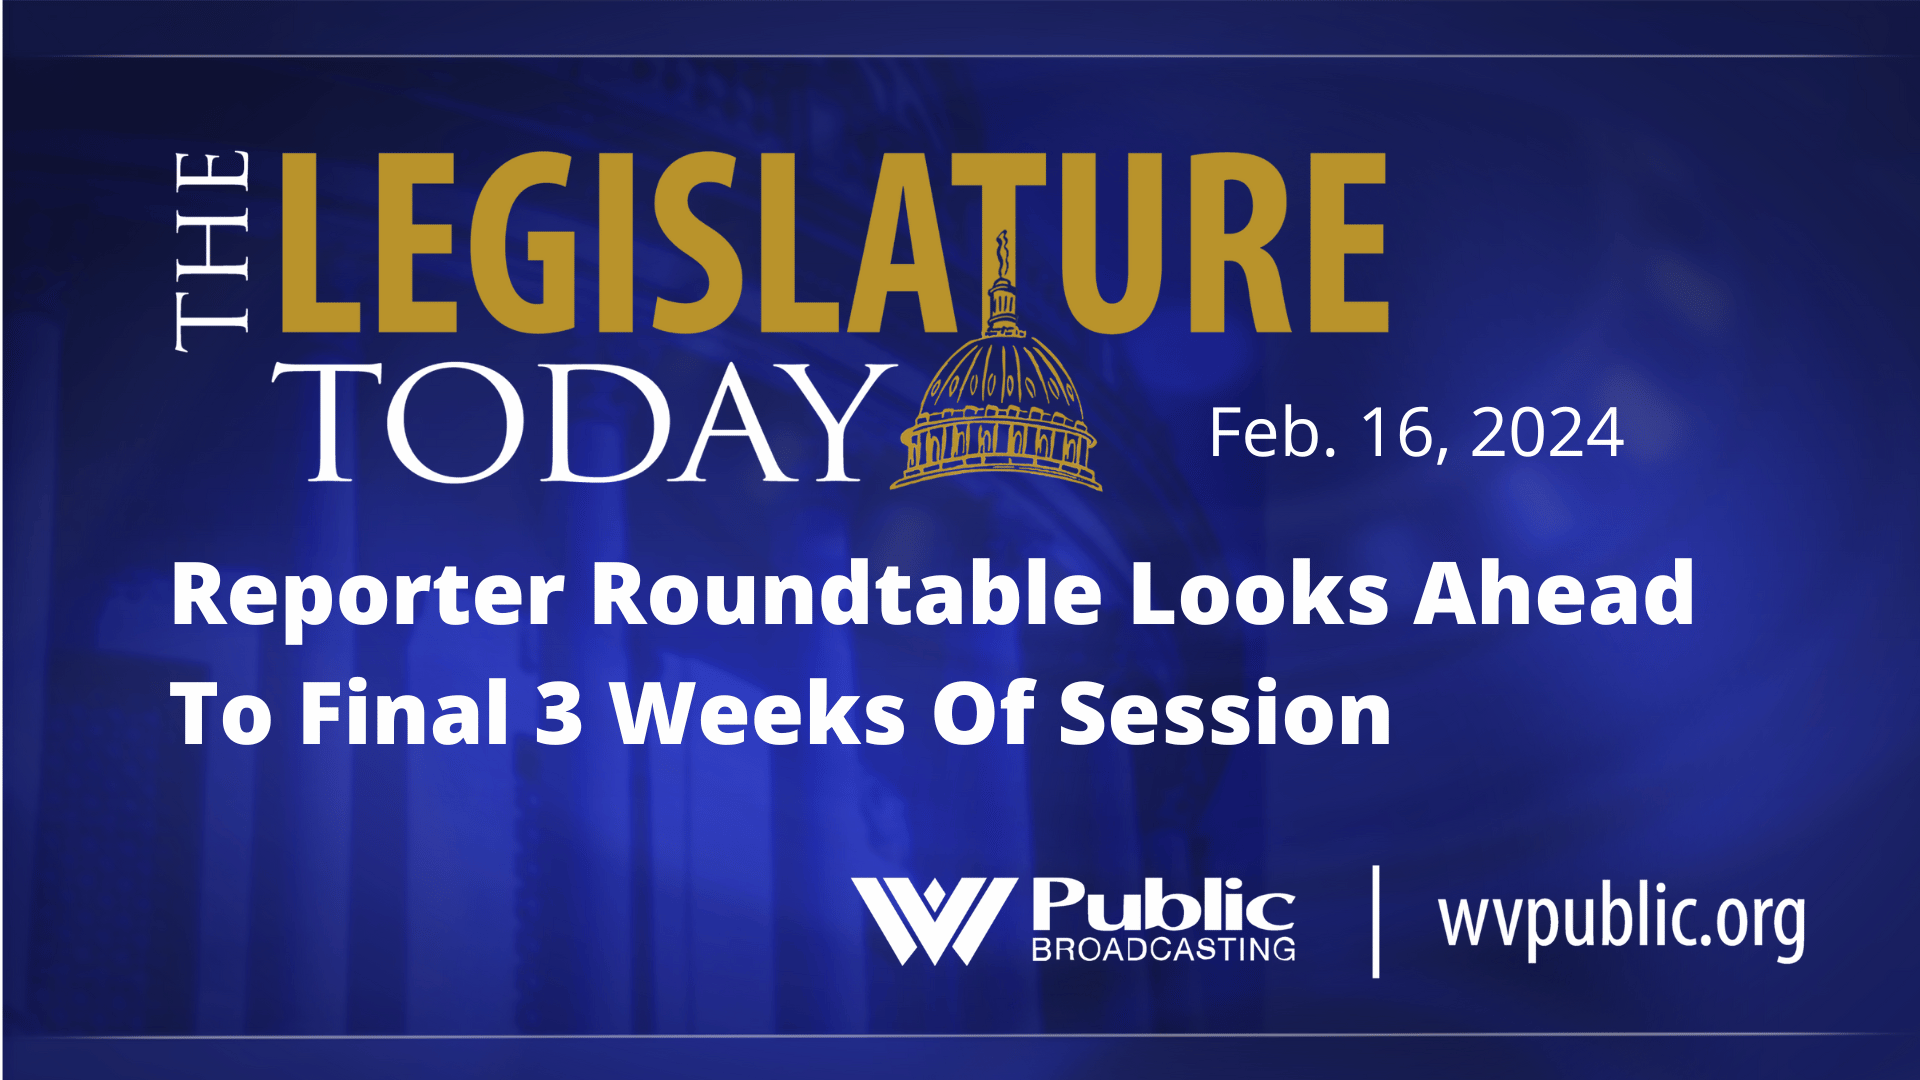 Reporter Roundtable Looks Ahead To Final 3 Weeks Of Session